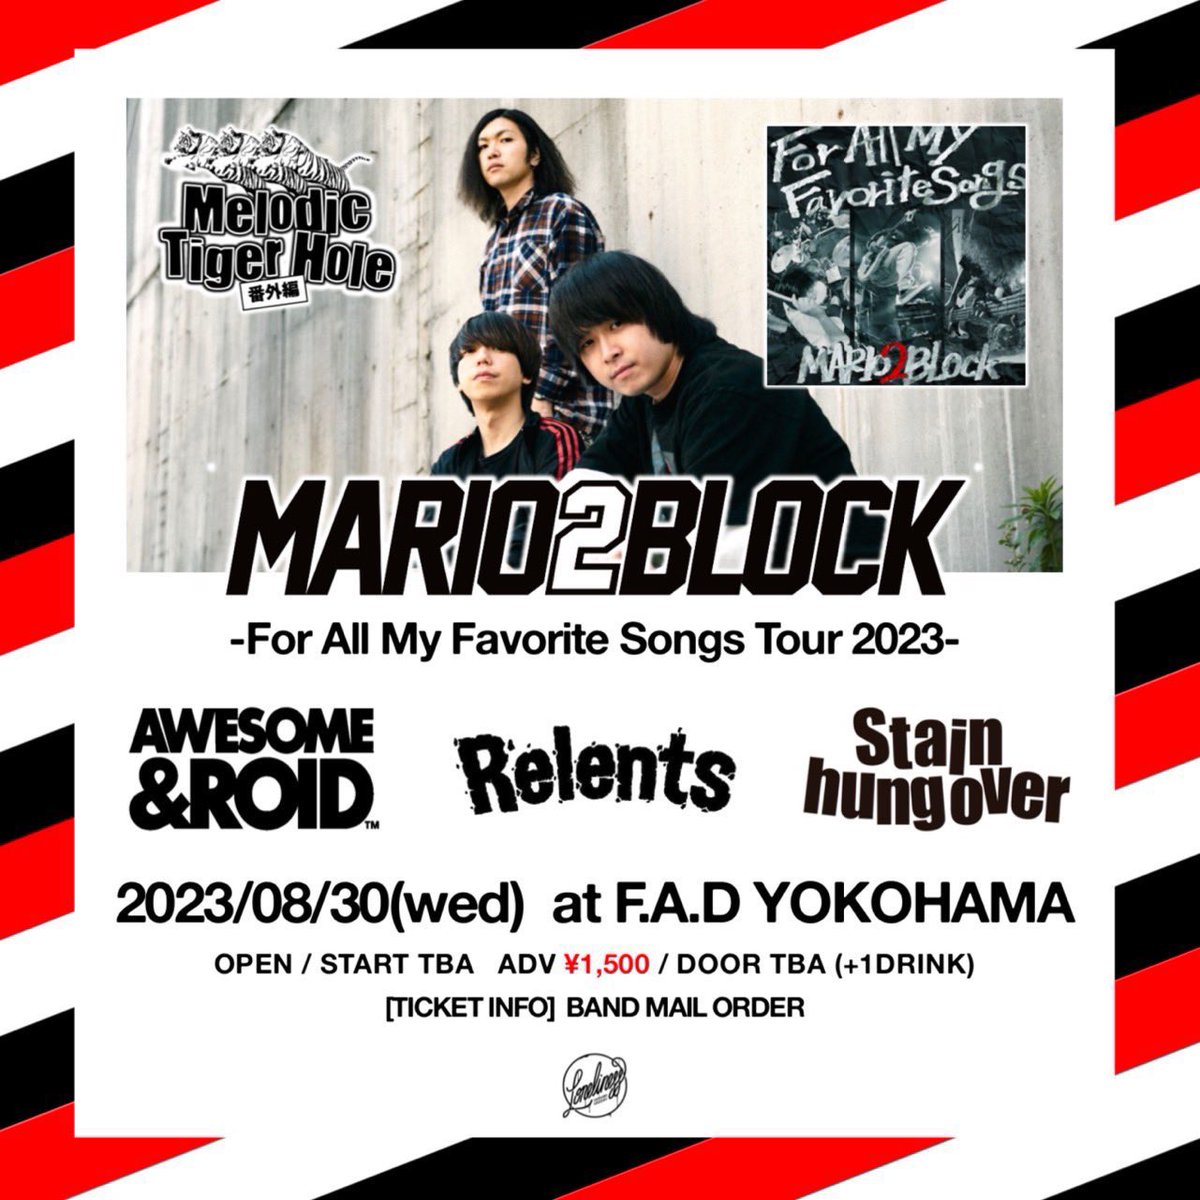 LONELINESS presents  Melodic Tiger Hole 番外編 MARIO2BLOCK “For All My Favorite Songs Tour 2023”